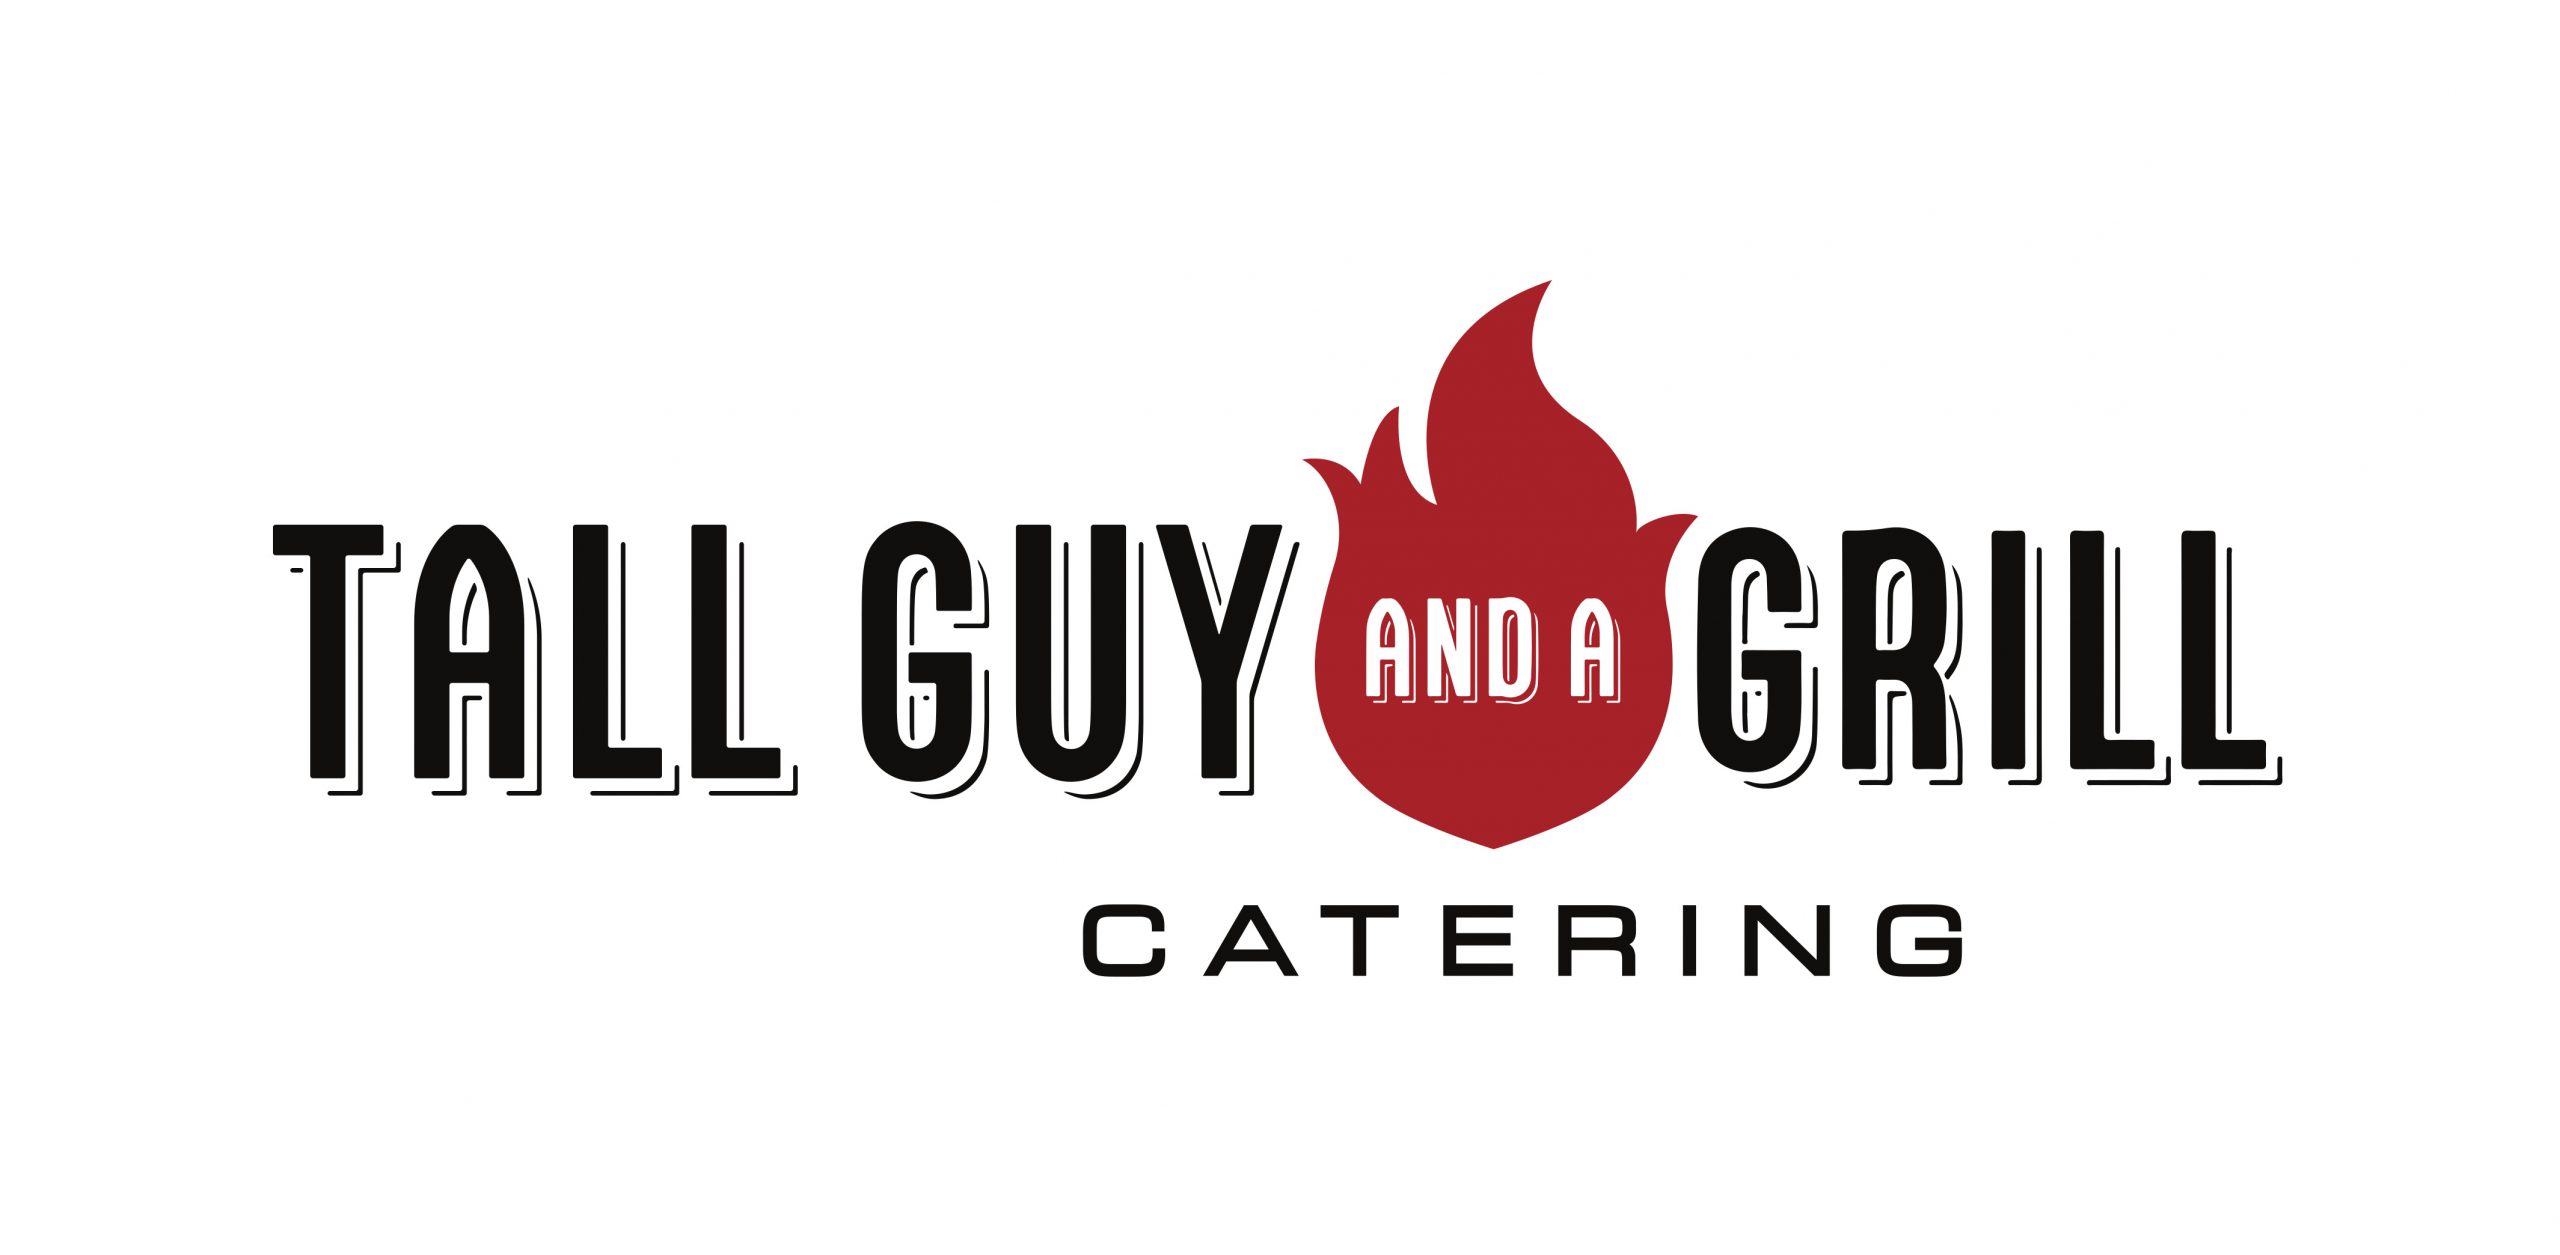 Tall Guy and a Grill Catering